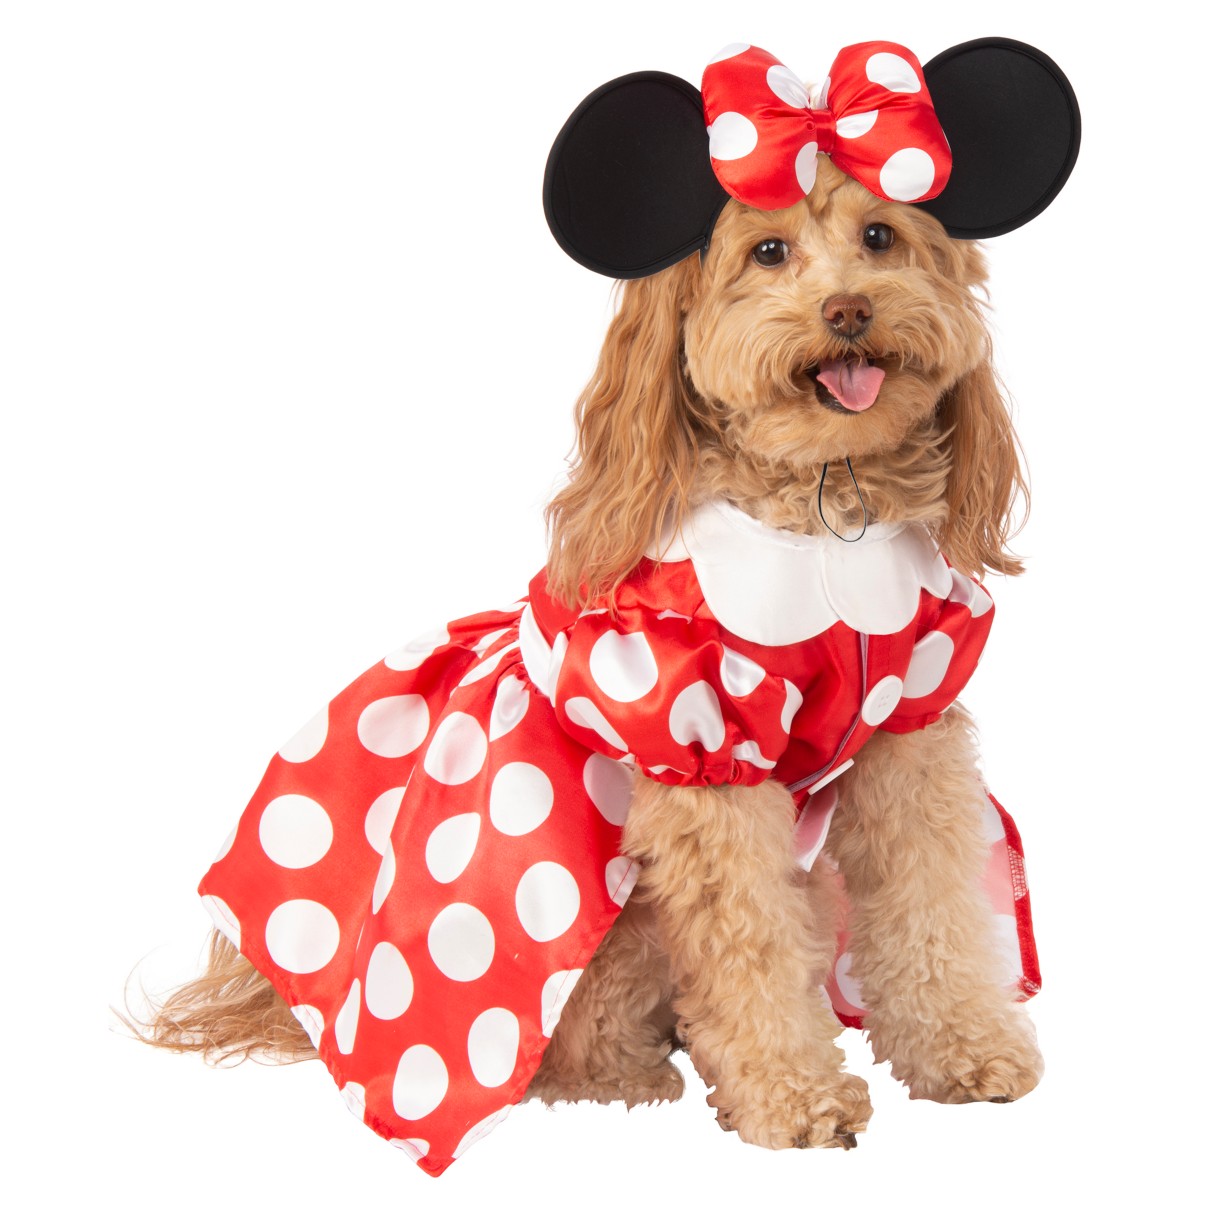 Minnie Mouse Pet Costume by Rubie's